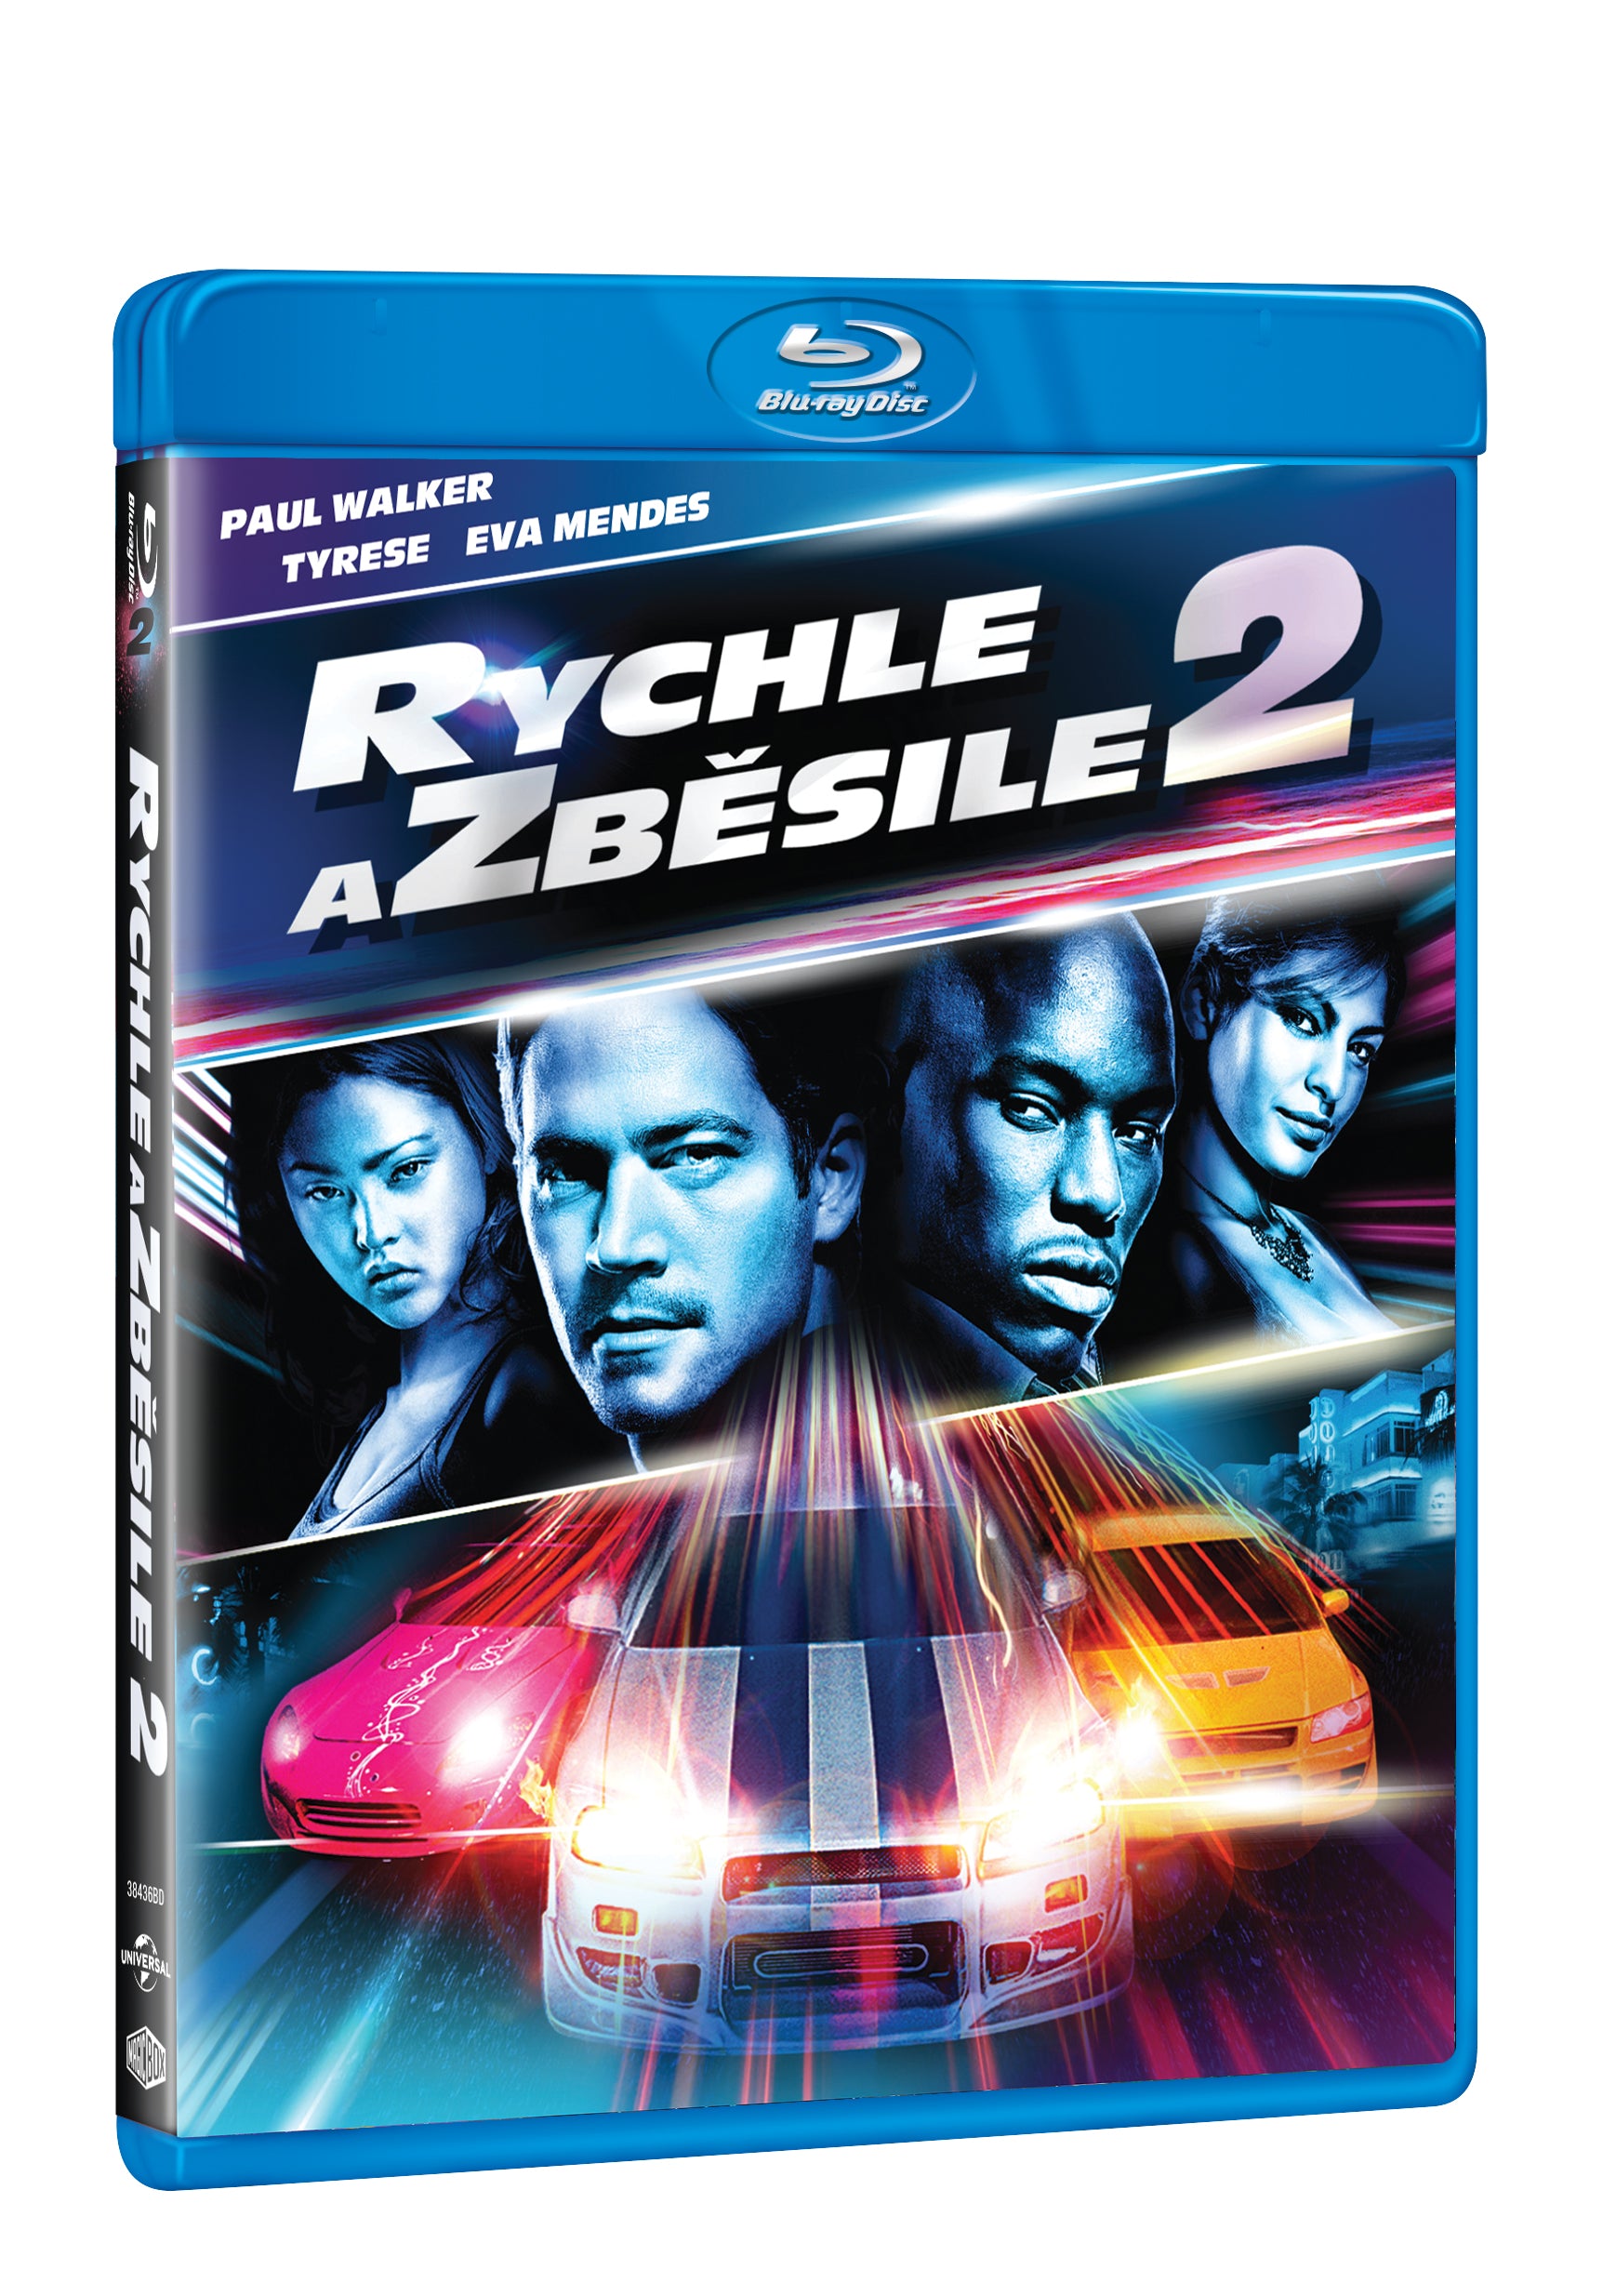 Rychle a zbesile 2 BD / 2 Fast 2 Furious - Czech version